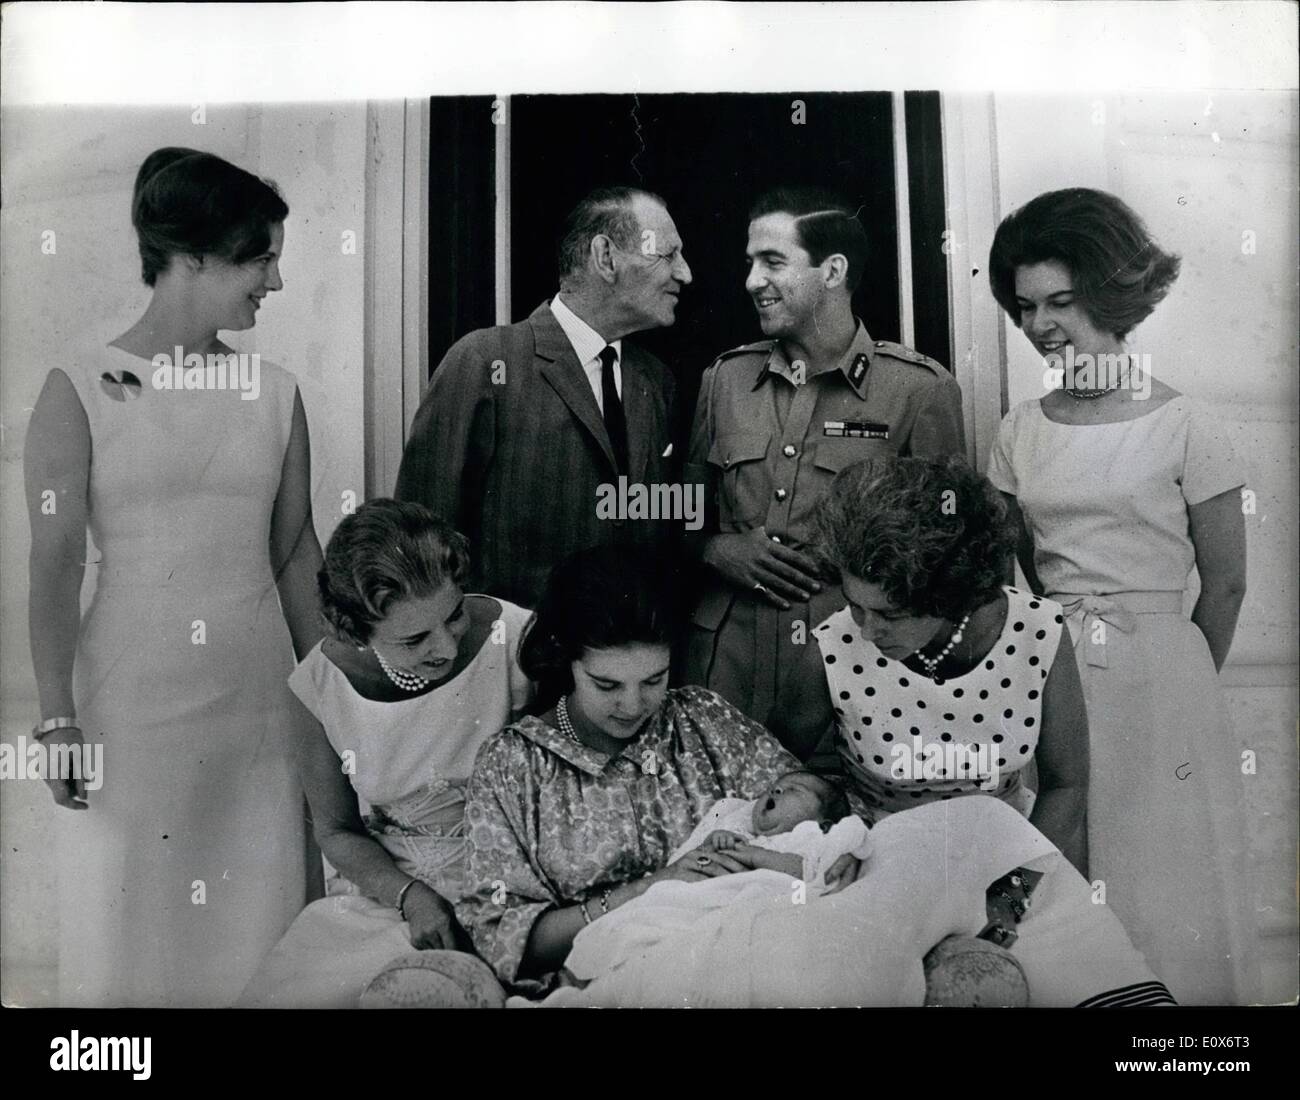 Jul. 07, 1965 - Princess Alexia - The New Greek Princess: Surrounded by members of the Greek and Danish Royal Families - Queen Anne -Marie, wife of King Constantine, holds their baby princess Alexia, who was born on July 10. Seated with her are Queen Ingrid of Denmark, and Queen Mother Frederica of Greece. In background (left to right) are Princess Margrethe, of Denmark; King Frederik of Denmark, King Constantine of Greece, and Princess Irene, of Greece. Stock Photo